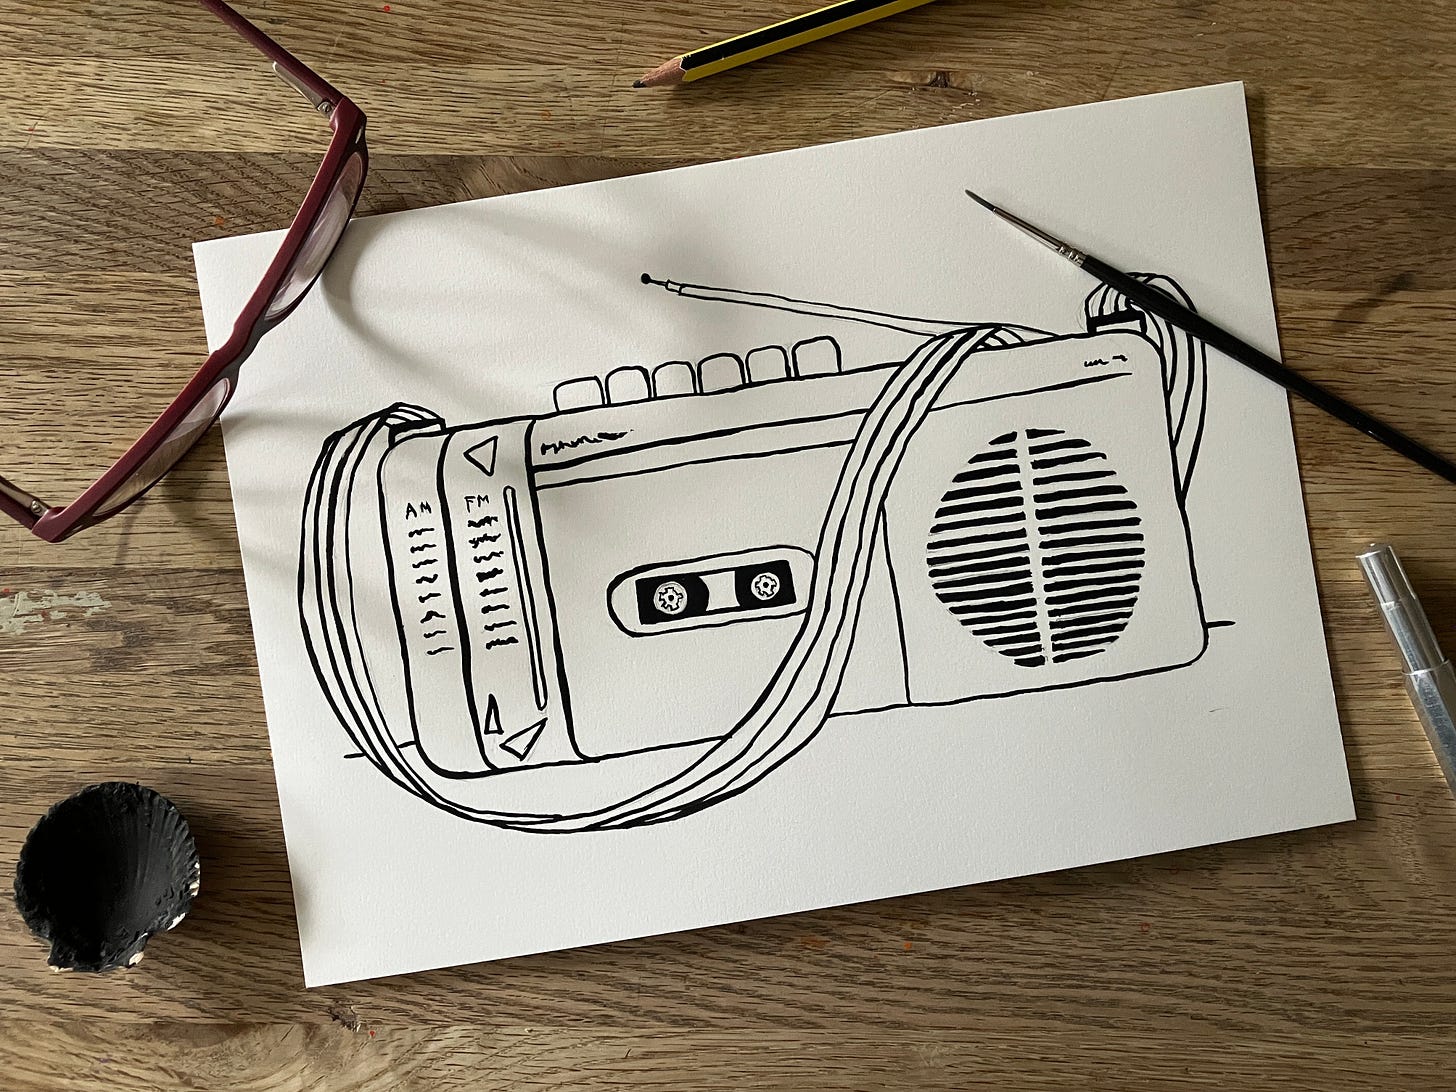 Painted picture of a retro tape player sits atop a wooden table surrounded by spectacles and pens and pencils